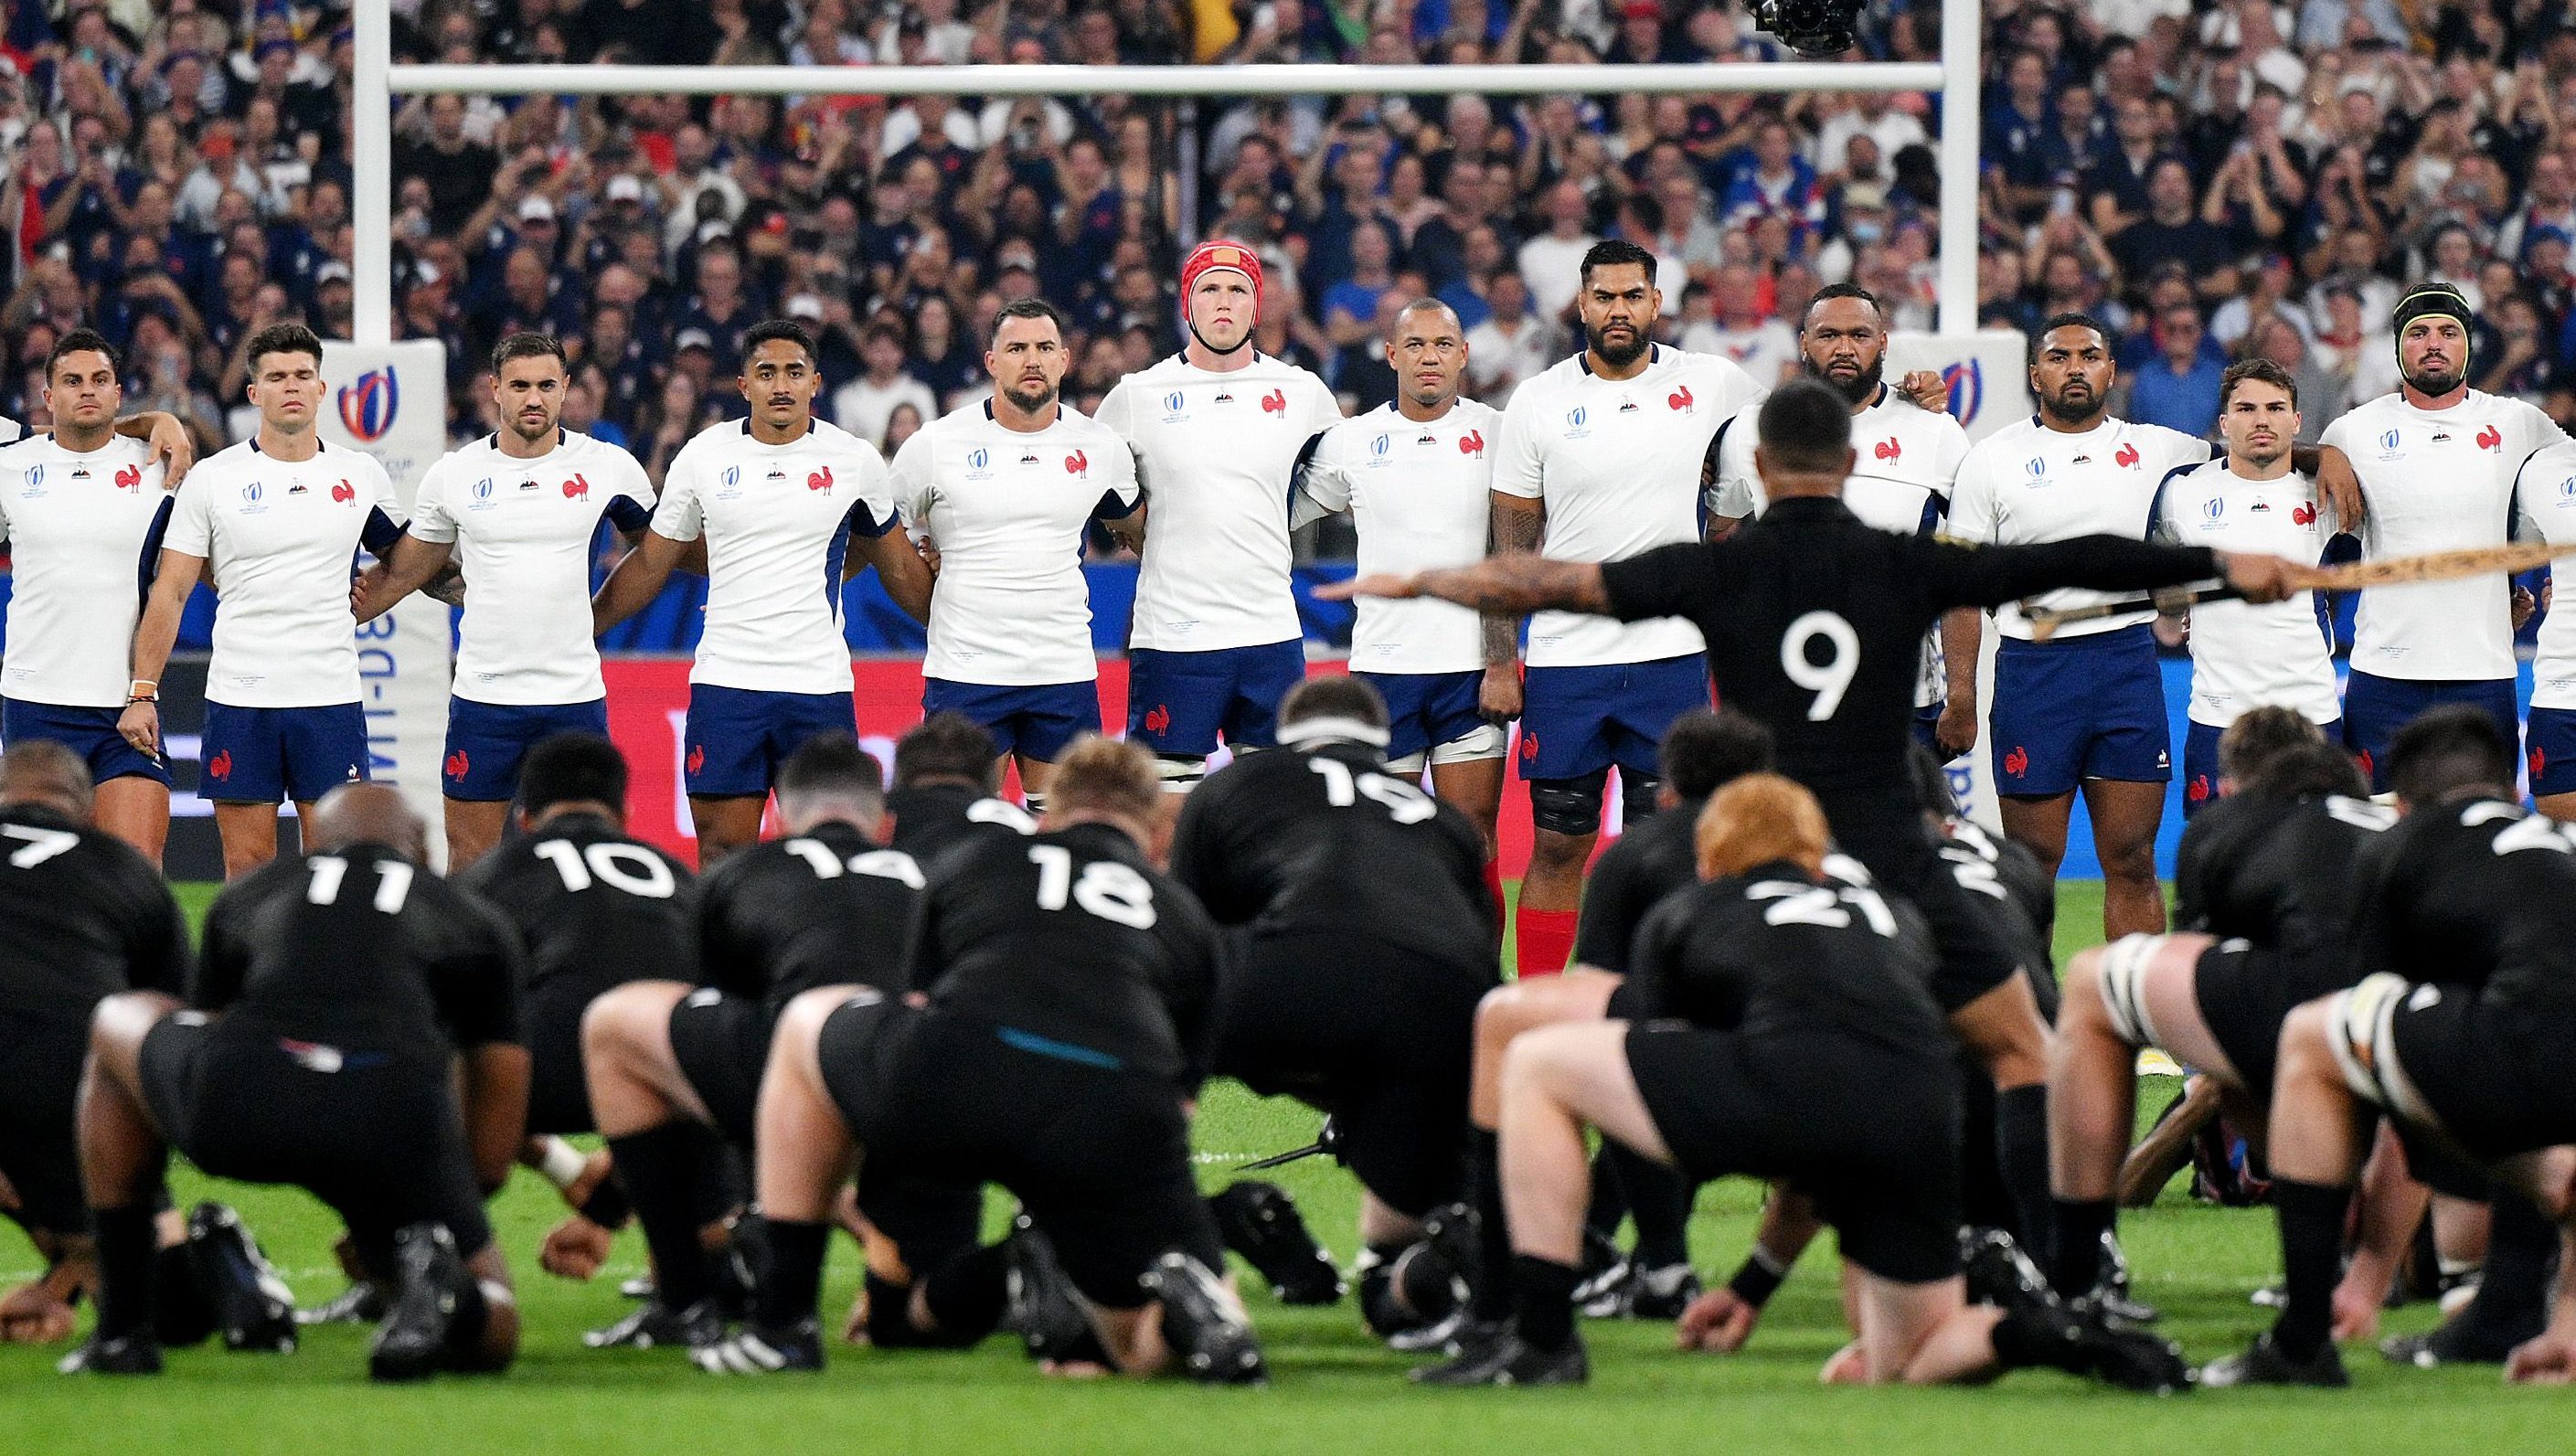 PARIS, FRANCE - SEPTEMBER 08: The players of France watch on as the players of New Zealand perform the Haka prior to the Rugby World Cup France 2023 Pool A match between France and New Zealand at Stade de France on September 08, 2023 in Paris, France. (Photo by David Ramos - World Rugby/World Rugby via Getty Images)